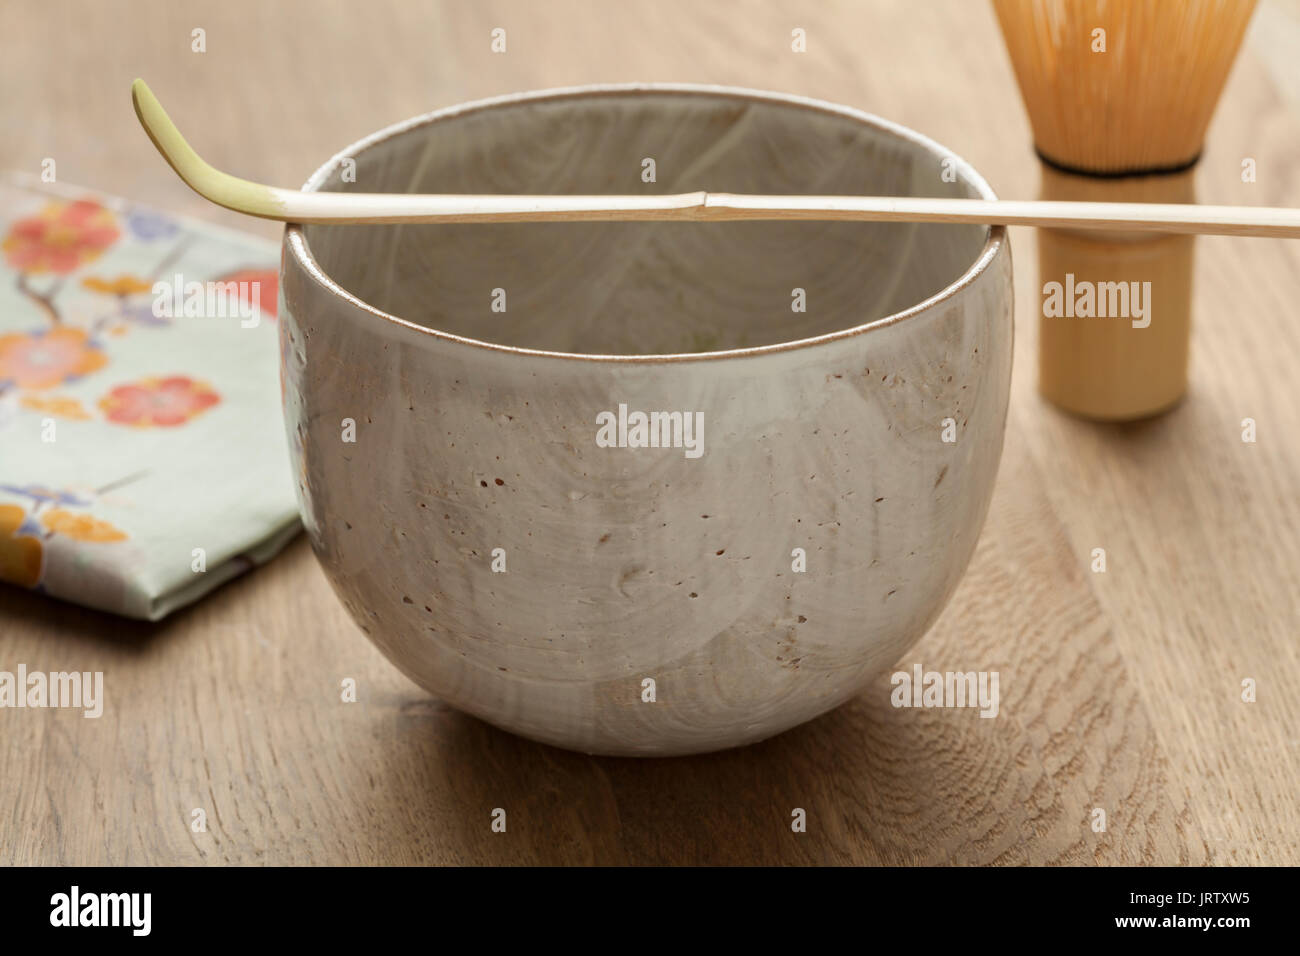 Accessories to prepare a bowl of Japanese matcha tea Stock Photo